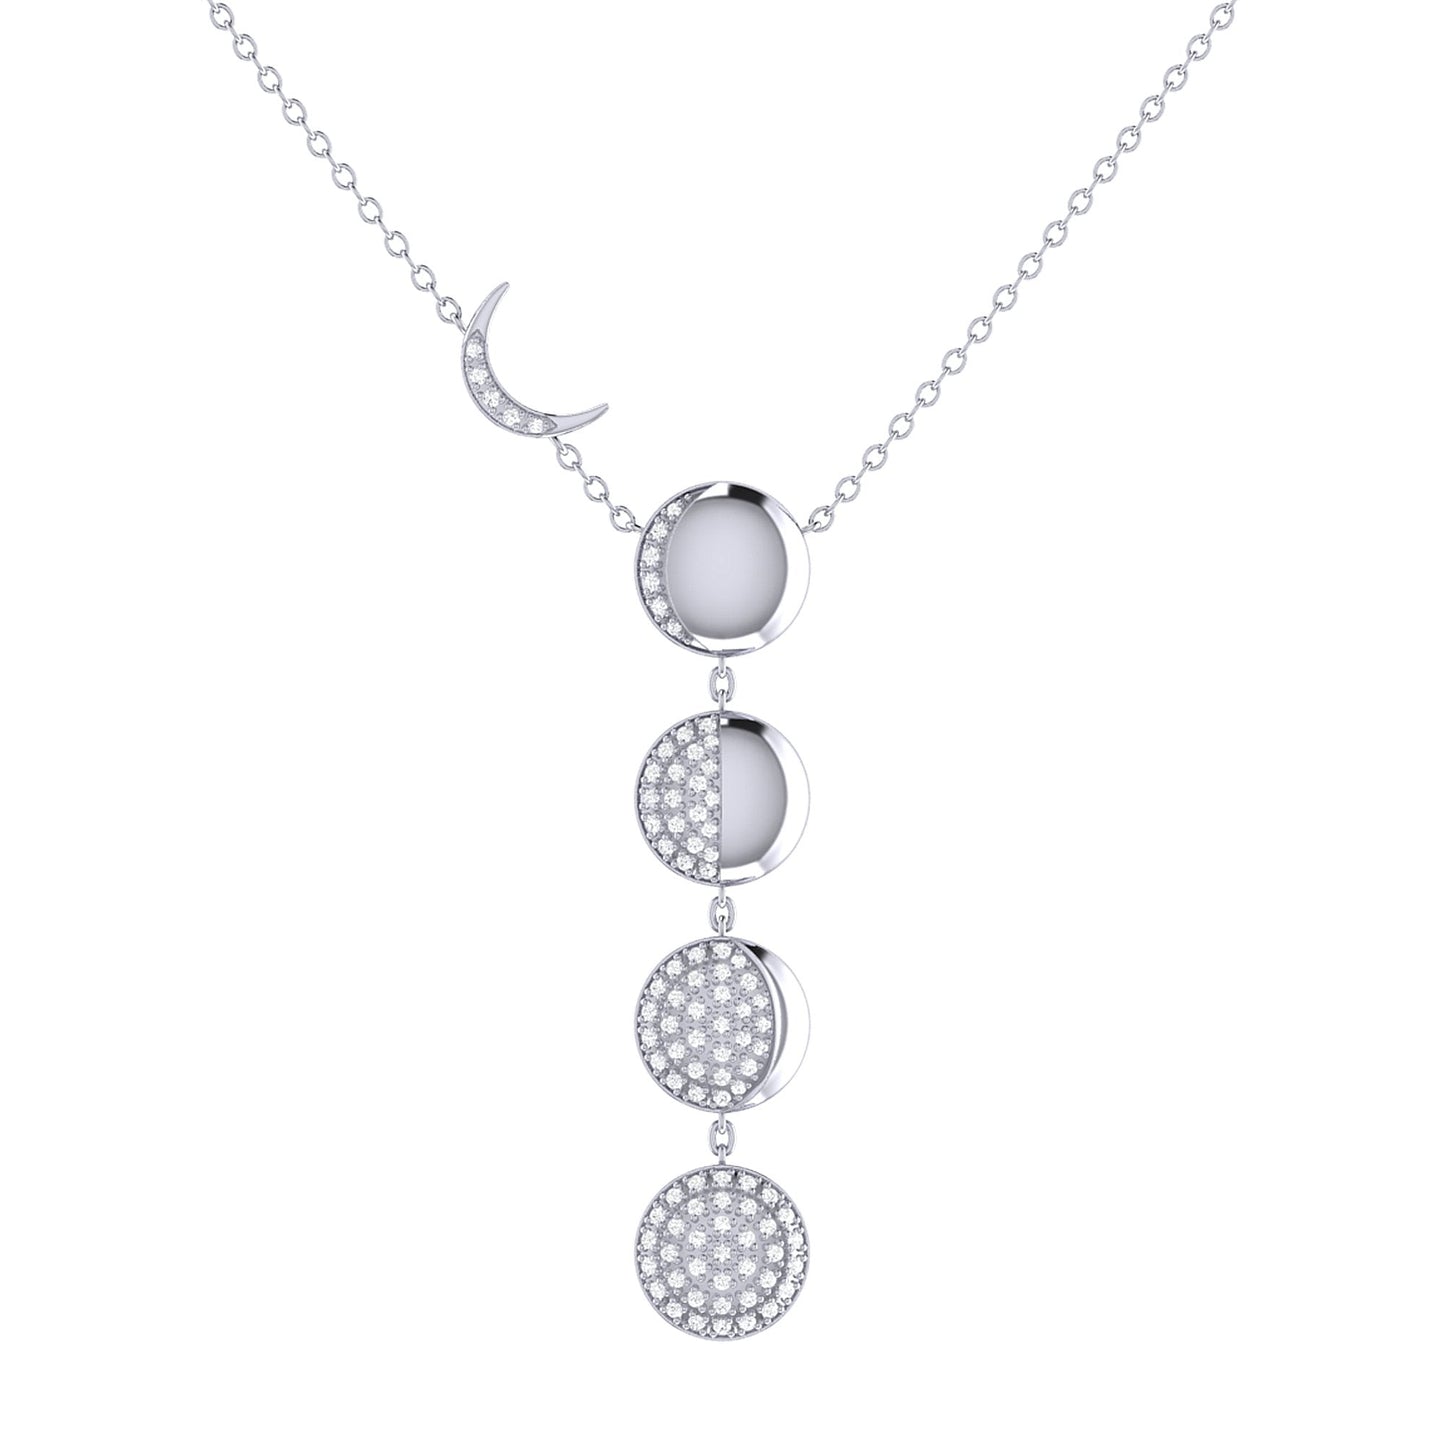 Moon Transformation Diamond Necklace in Sterling Silver by LuvMyJewelry